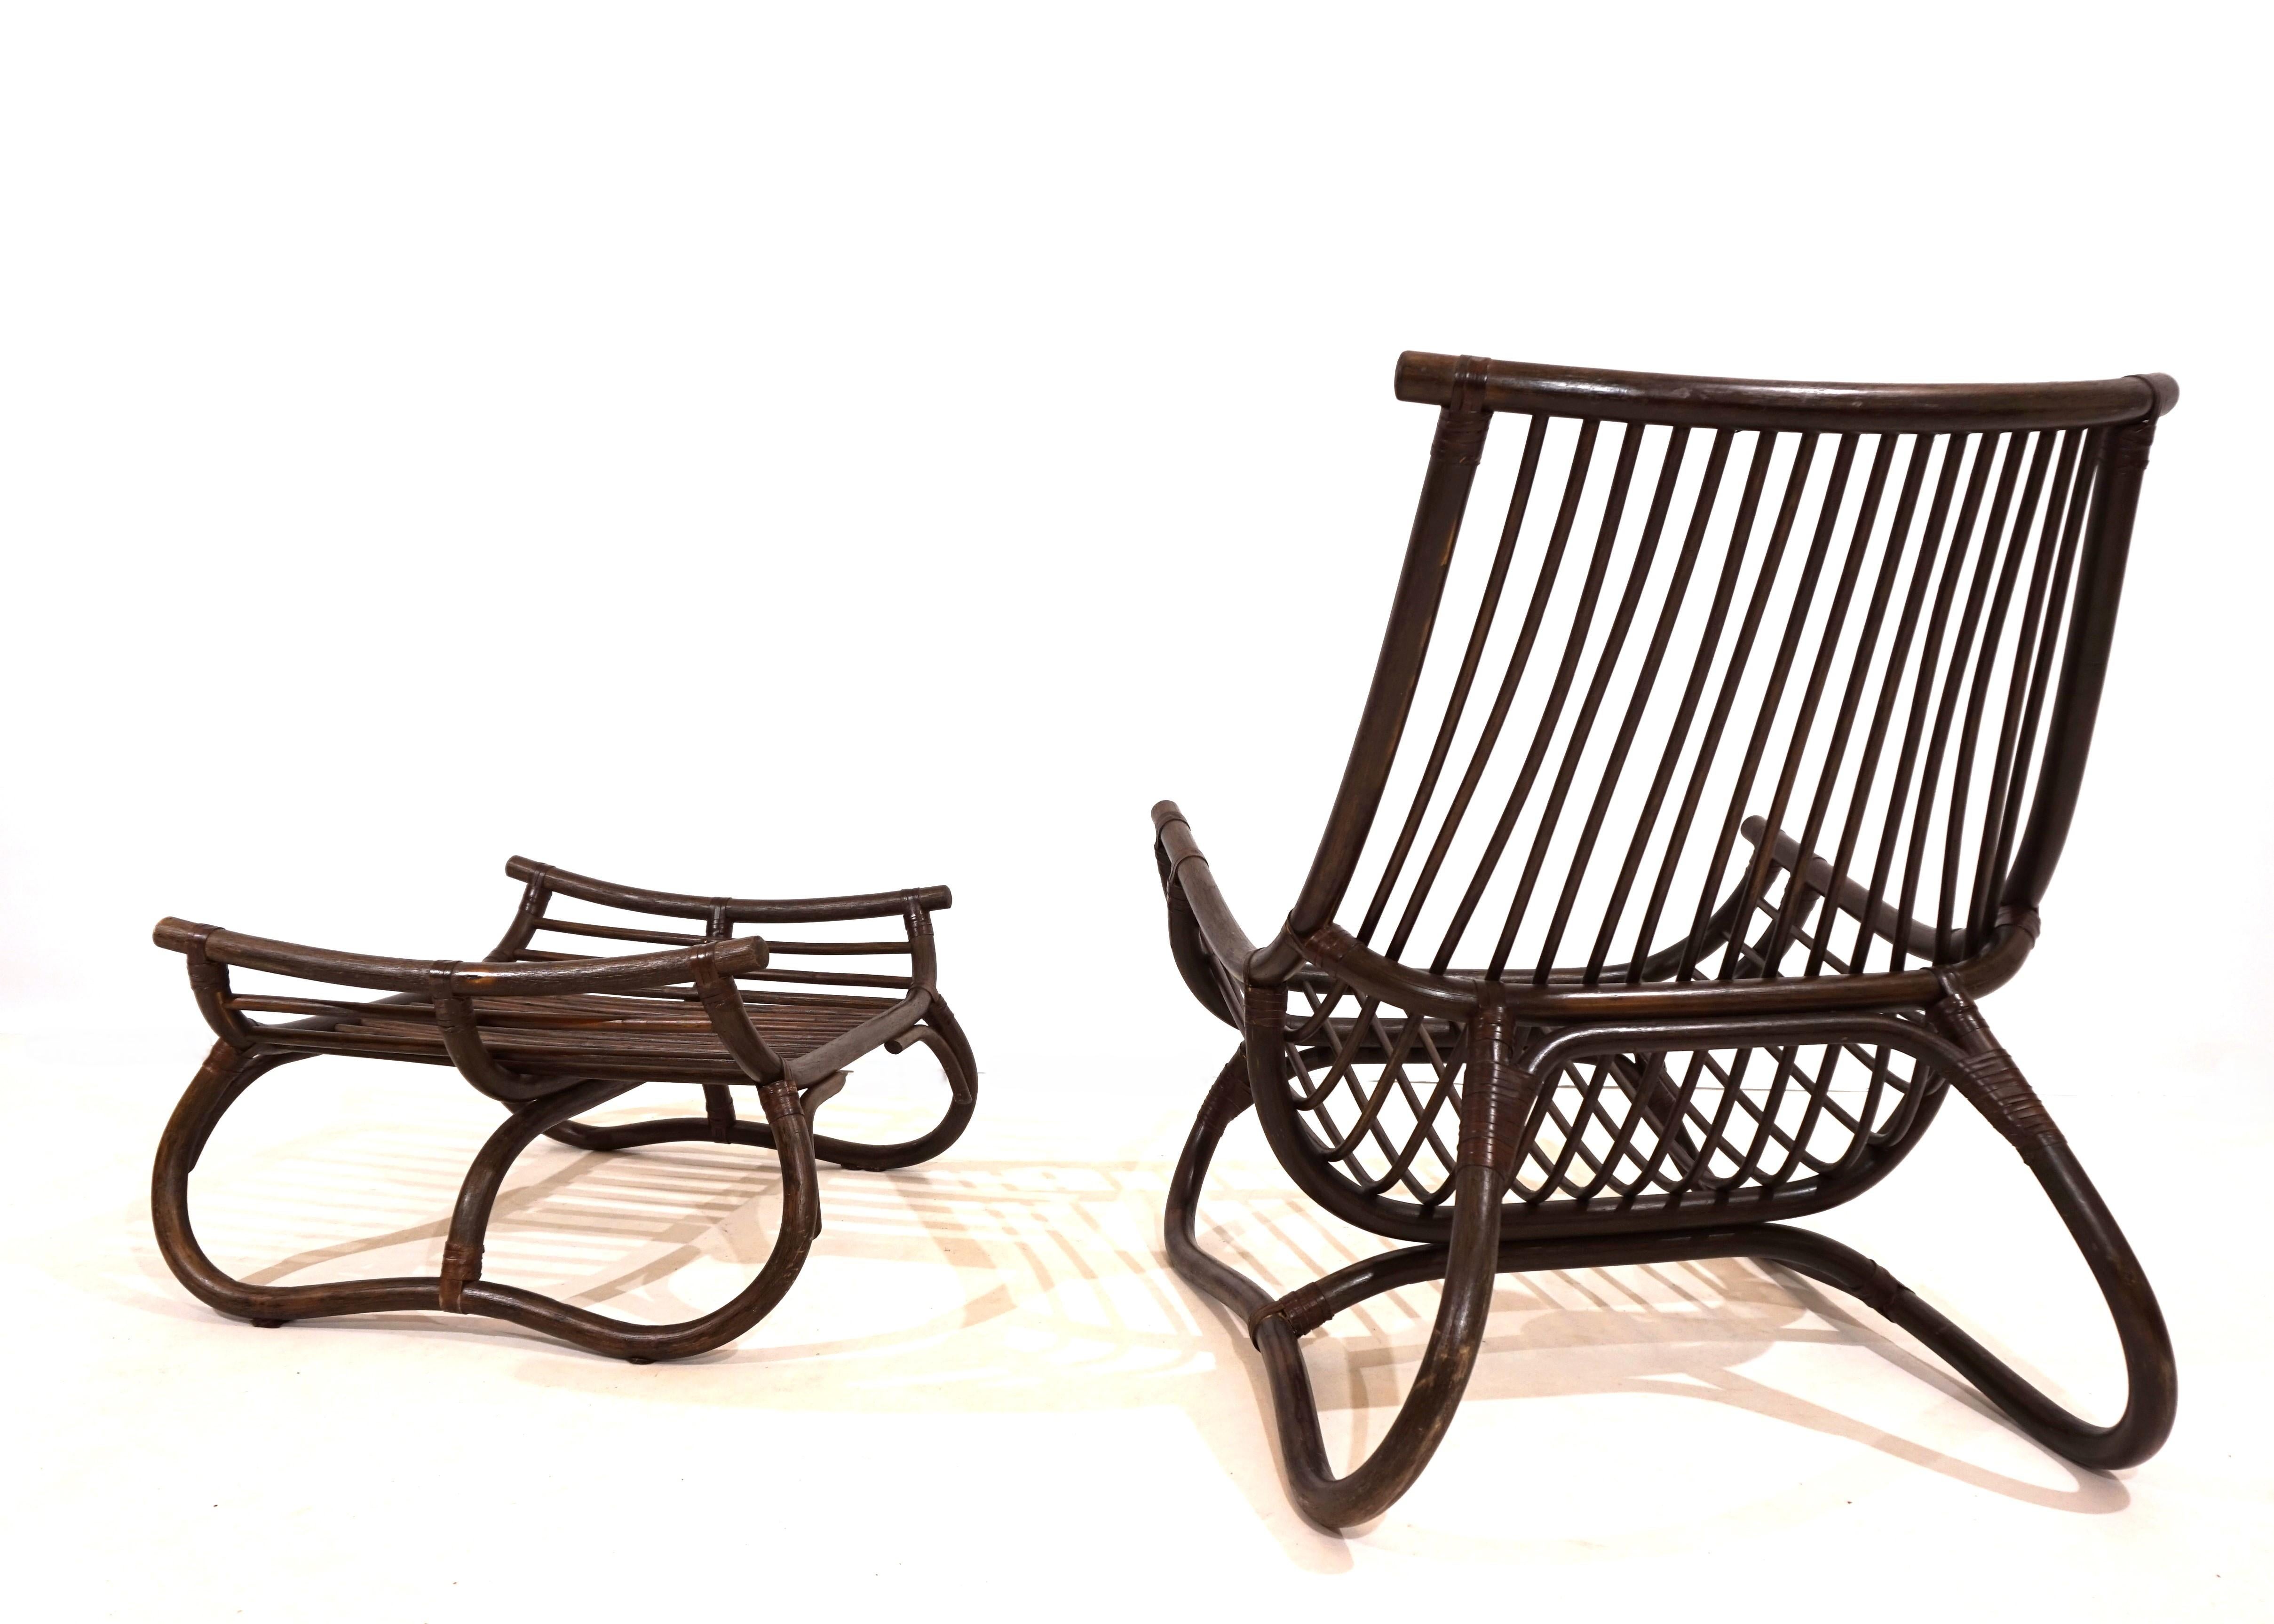 The lounge chair is made of Manou rattan and is in very good condition. The frame made of dark-stained Manou rattan shows minimal signs of wear. The grids of the back and seat as well as the reed connectors are flawless and undamaged. The chair has